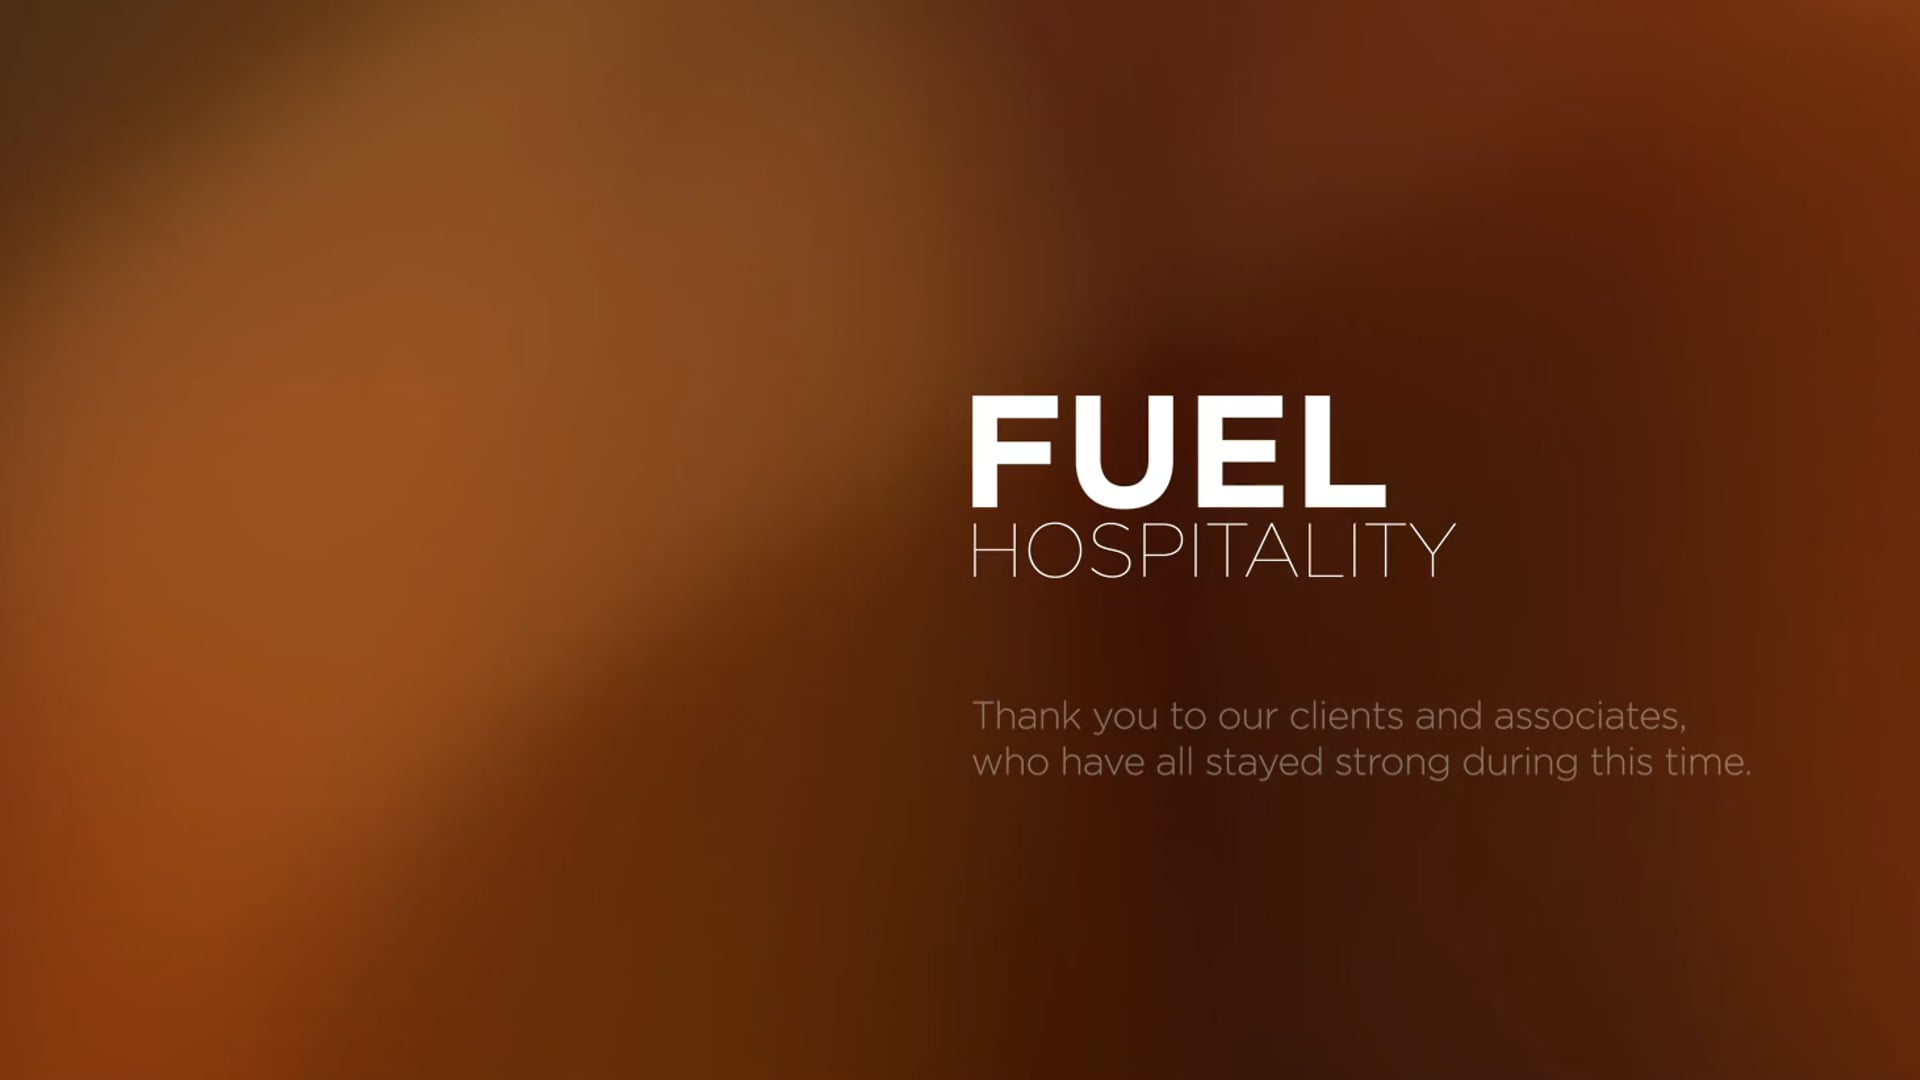 Fuel Hospitality - Our Doors Will Open Again